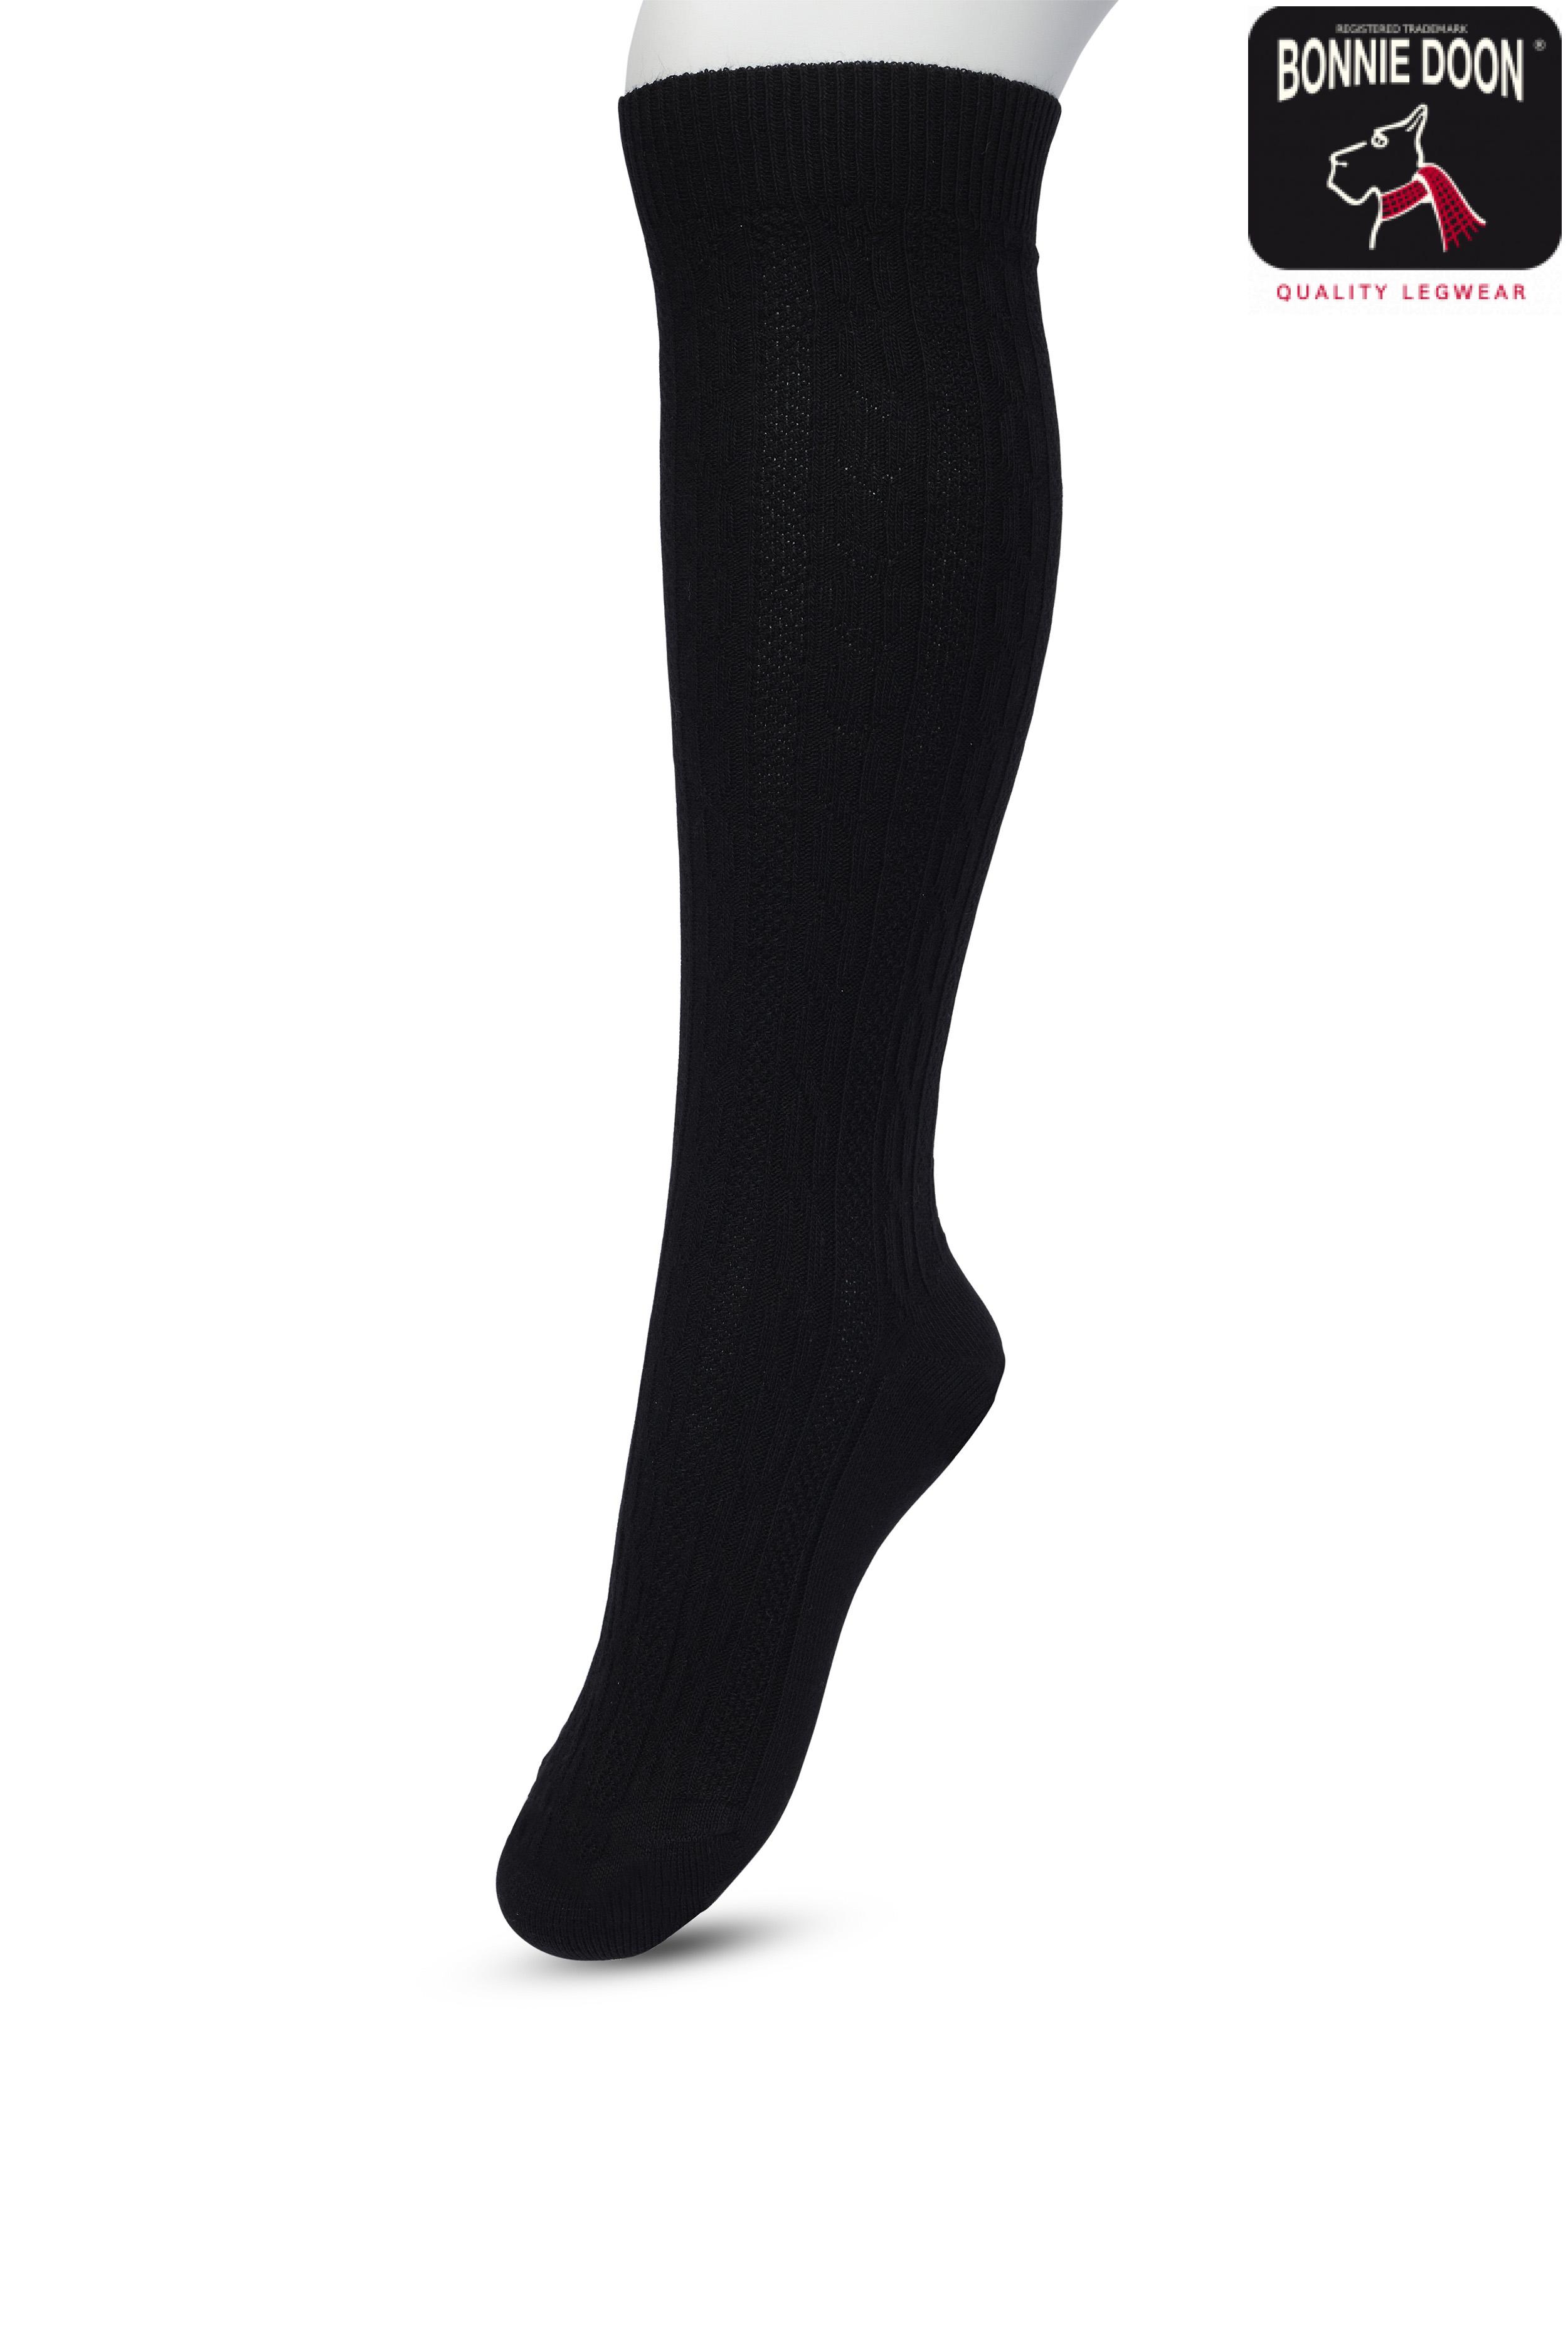 Classic Cable knee high Black